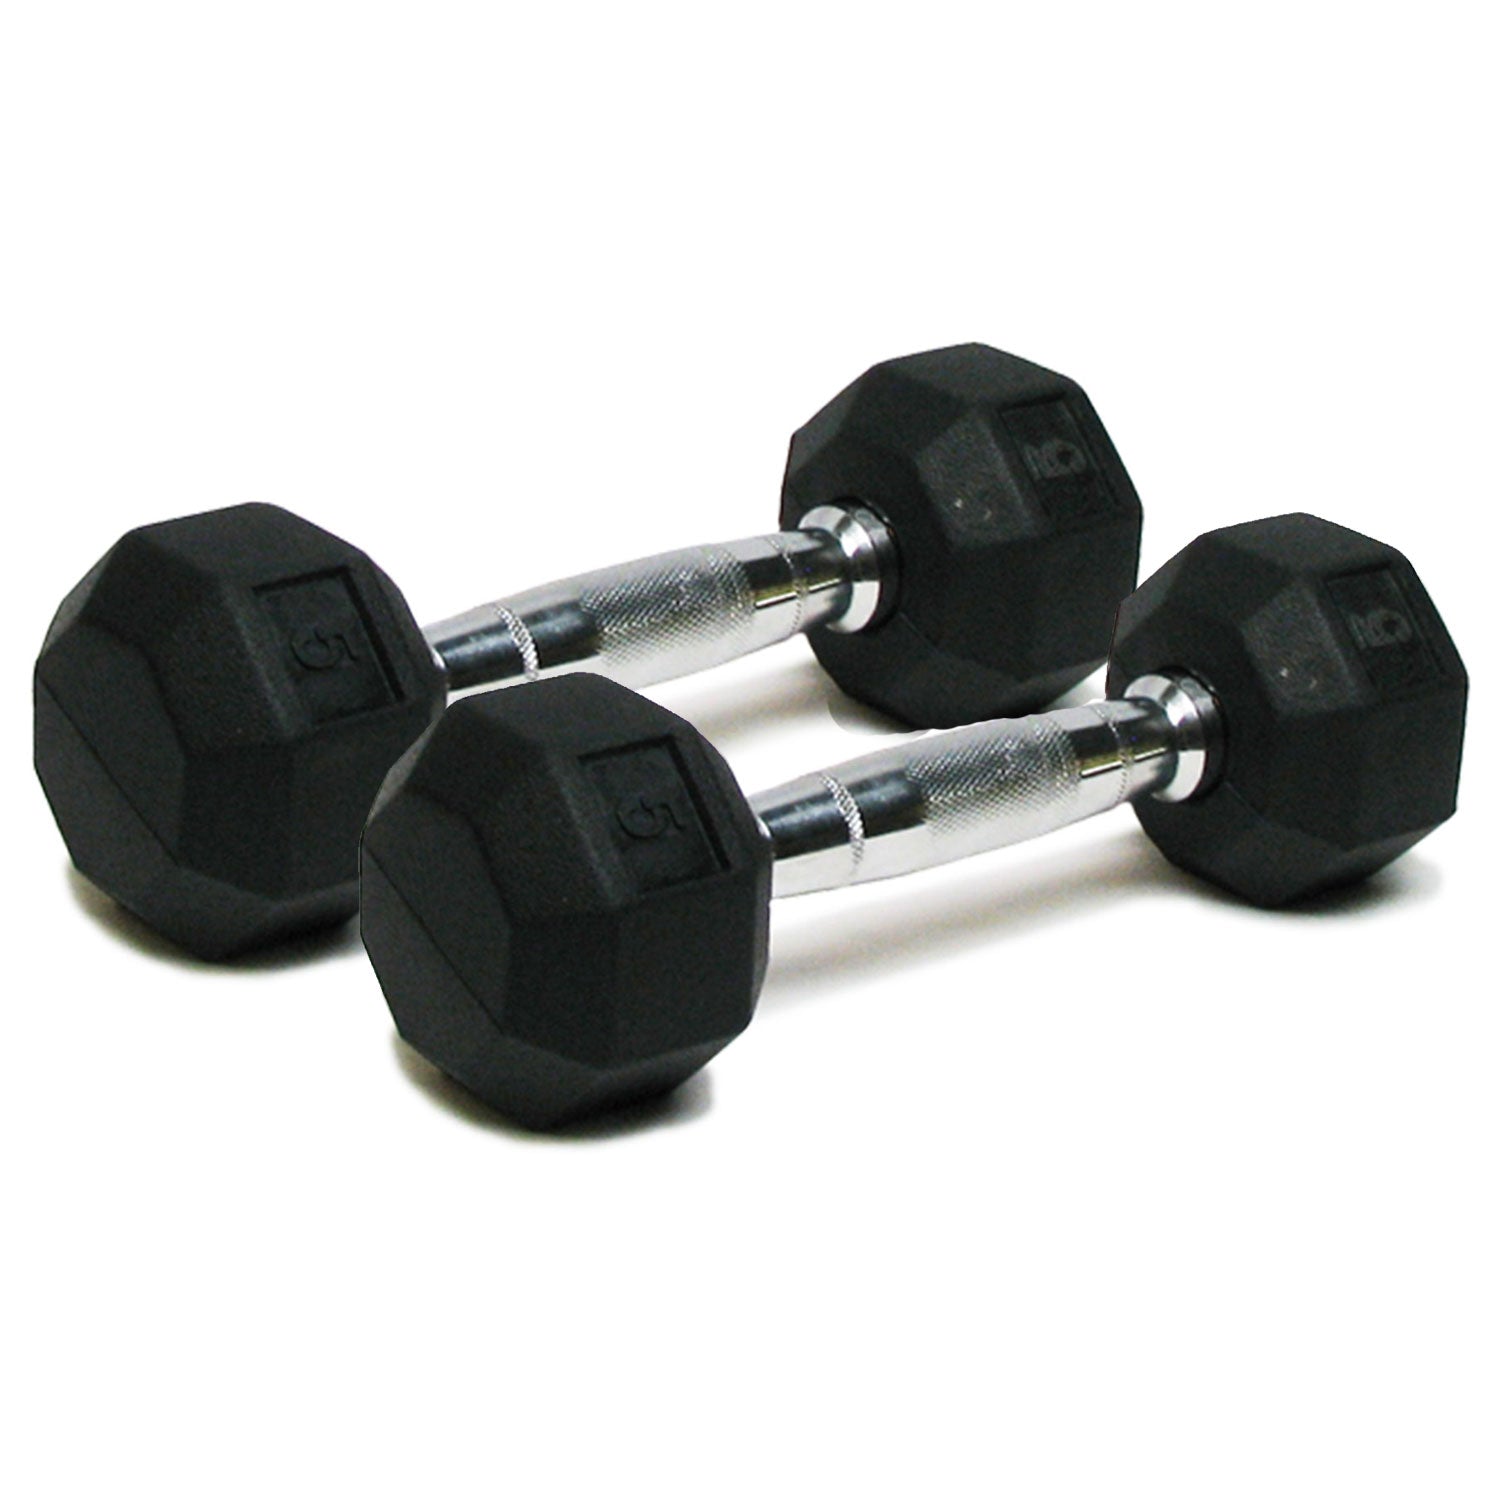 12 lb hand weights